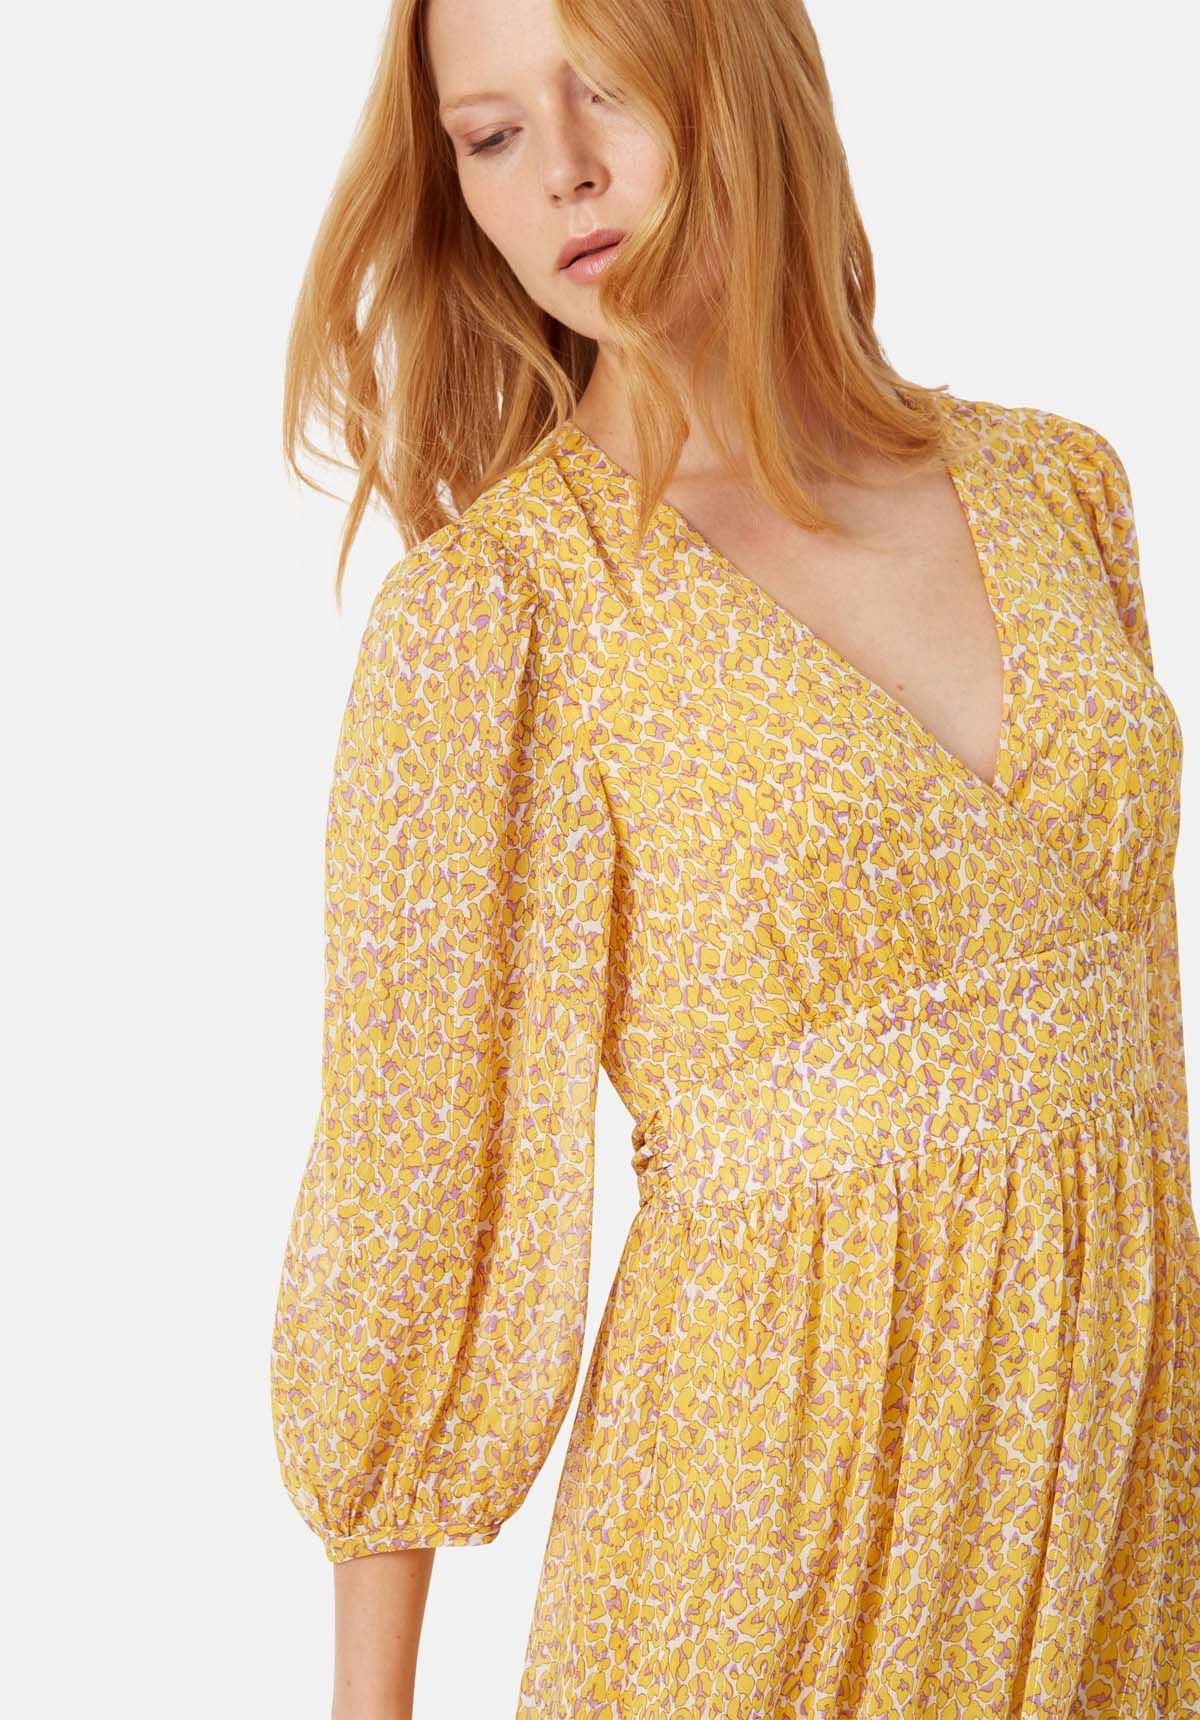 Flattering, feminine and versatile – The Silent Breaths Dress is the ultimate throw-it-on-and-go style. This animal print maxi wrap dress comes complete with volume sleeves, a feminine contrast waistline and distinctive yellow animal print. Style her up or down with chunky boots or your favourite heels. 100% Polyester, Lining 100% Viscose.